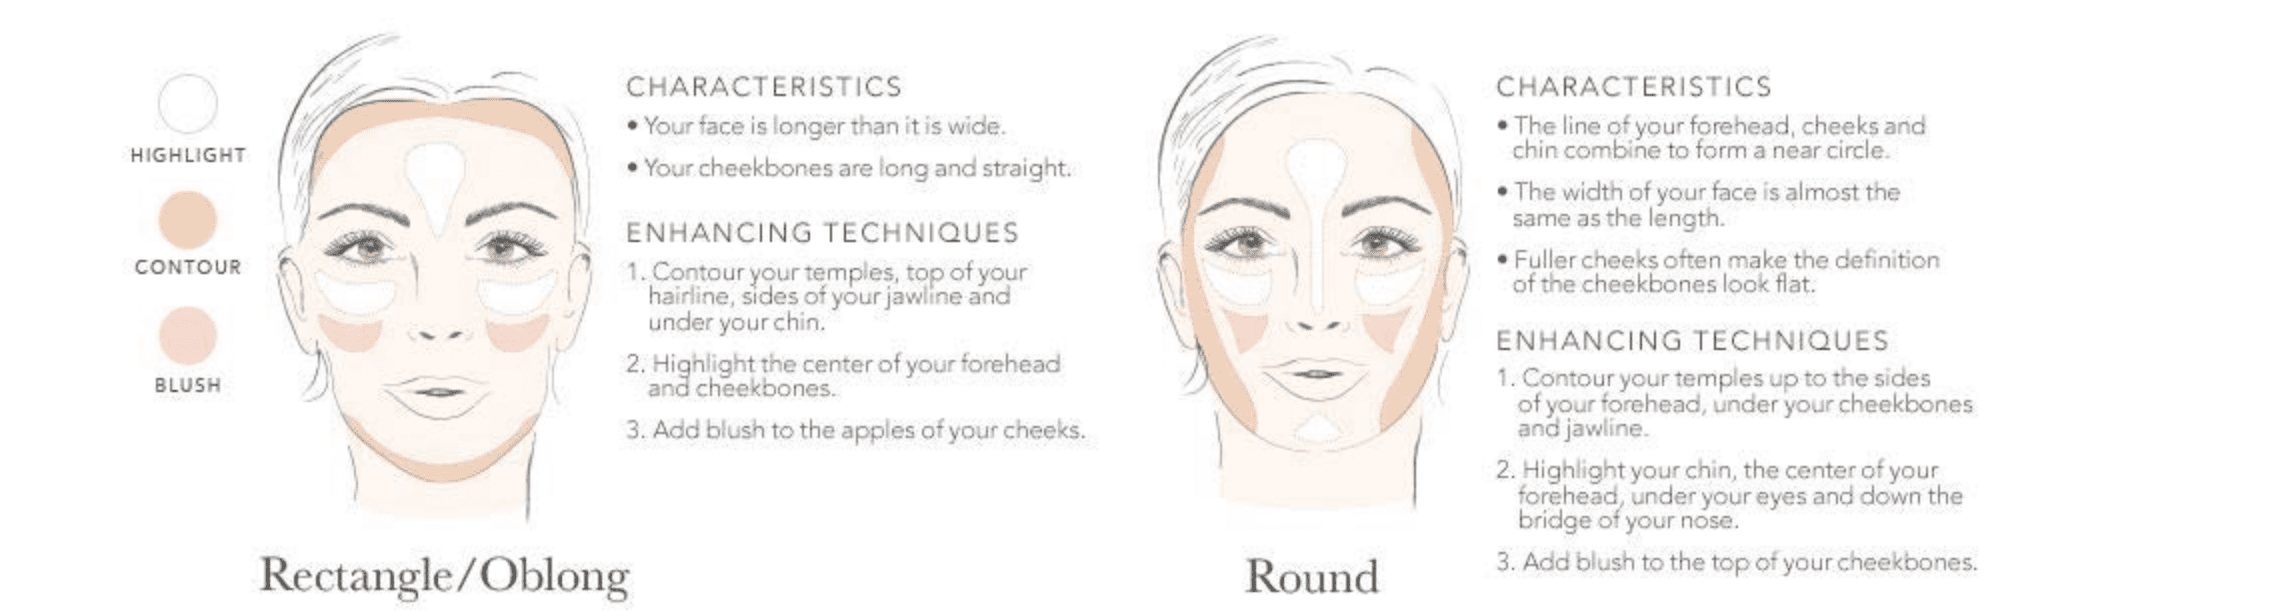 Face Shape Rectangle/Oblong and Round 